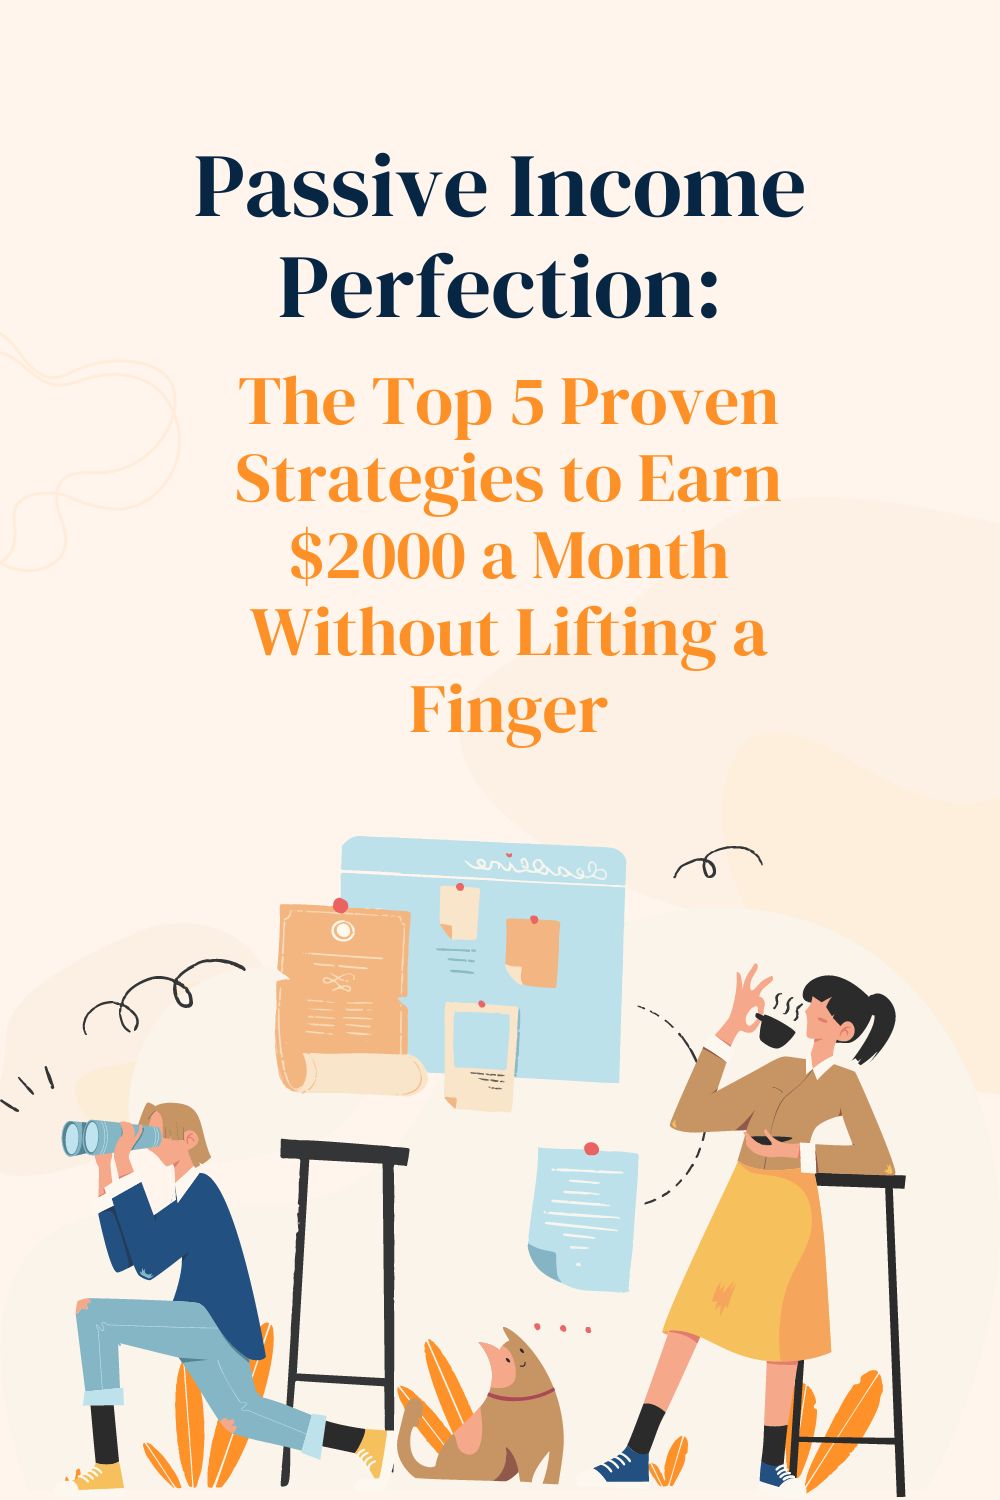 Passive Income Perfection: The Top 5 Proven Strategies to Earn $2000 a Month Without Lifting a Finger